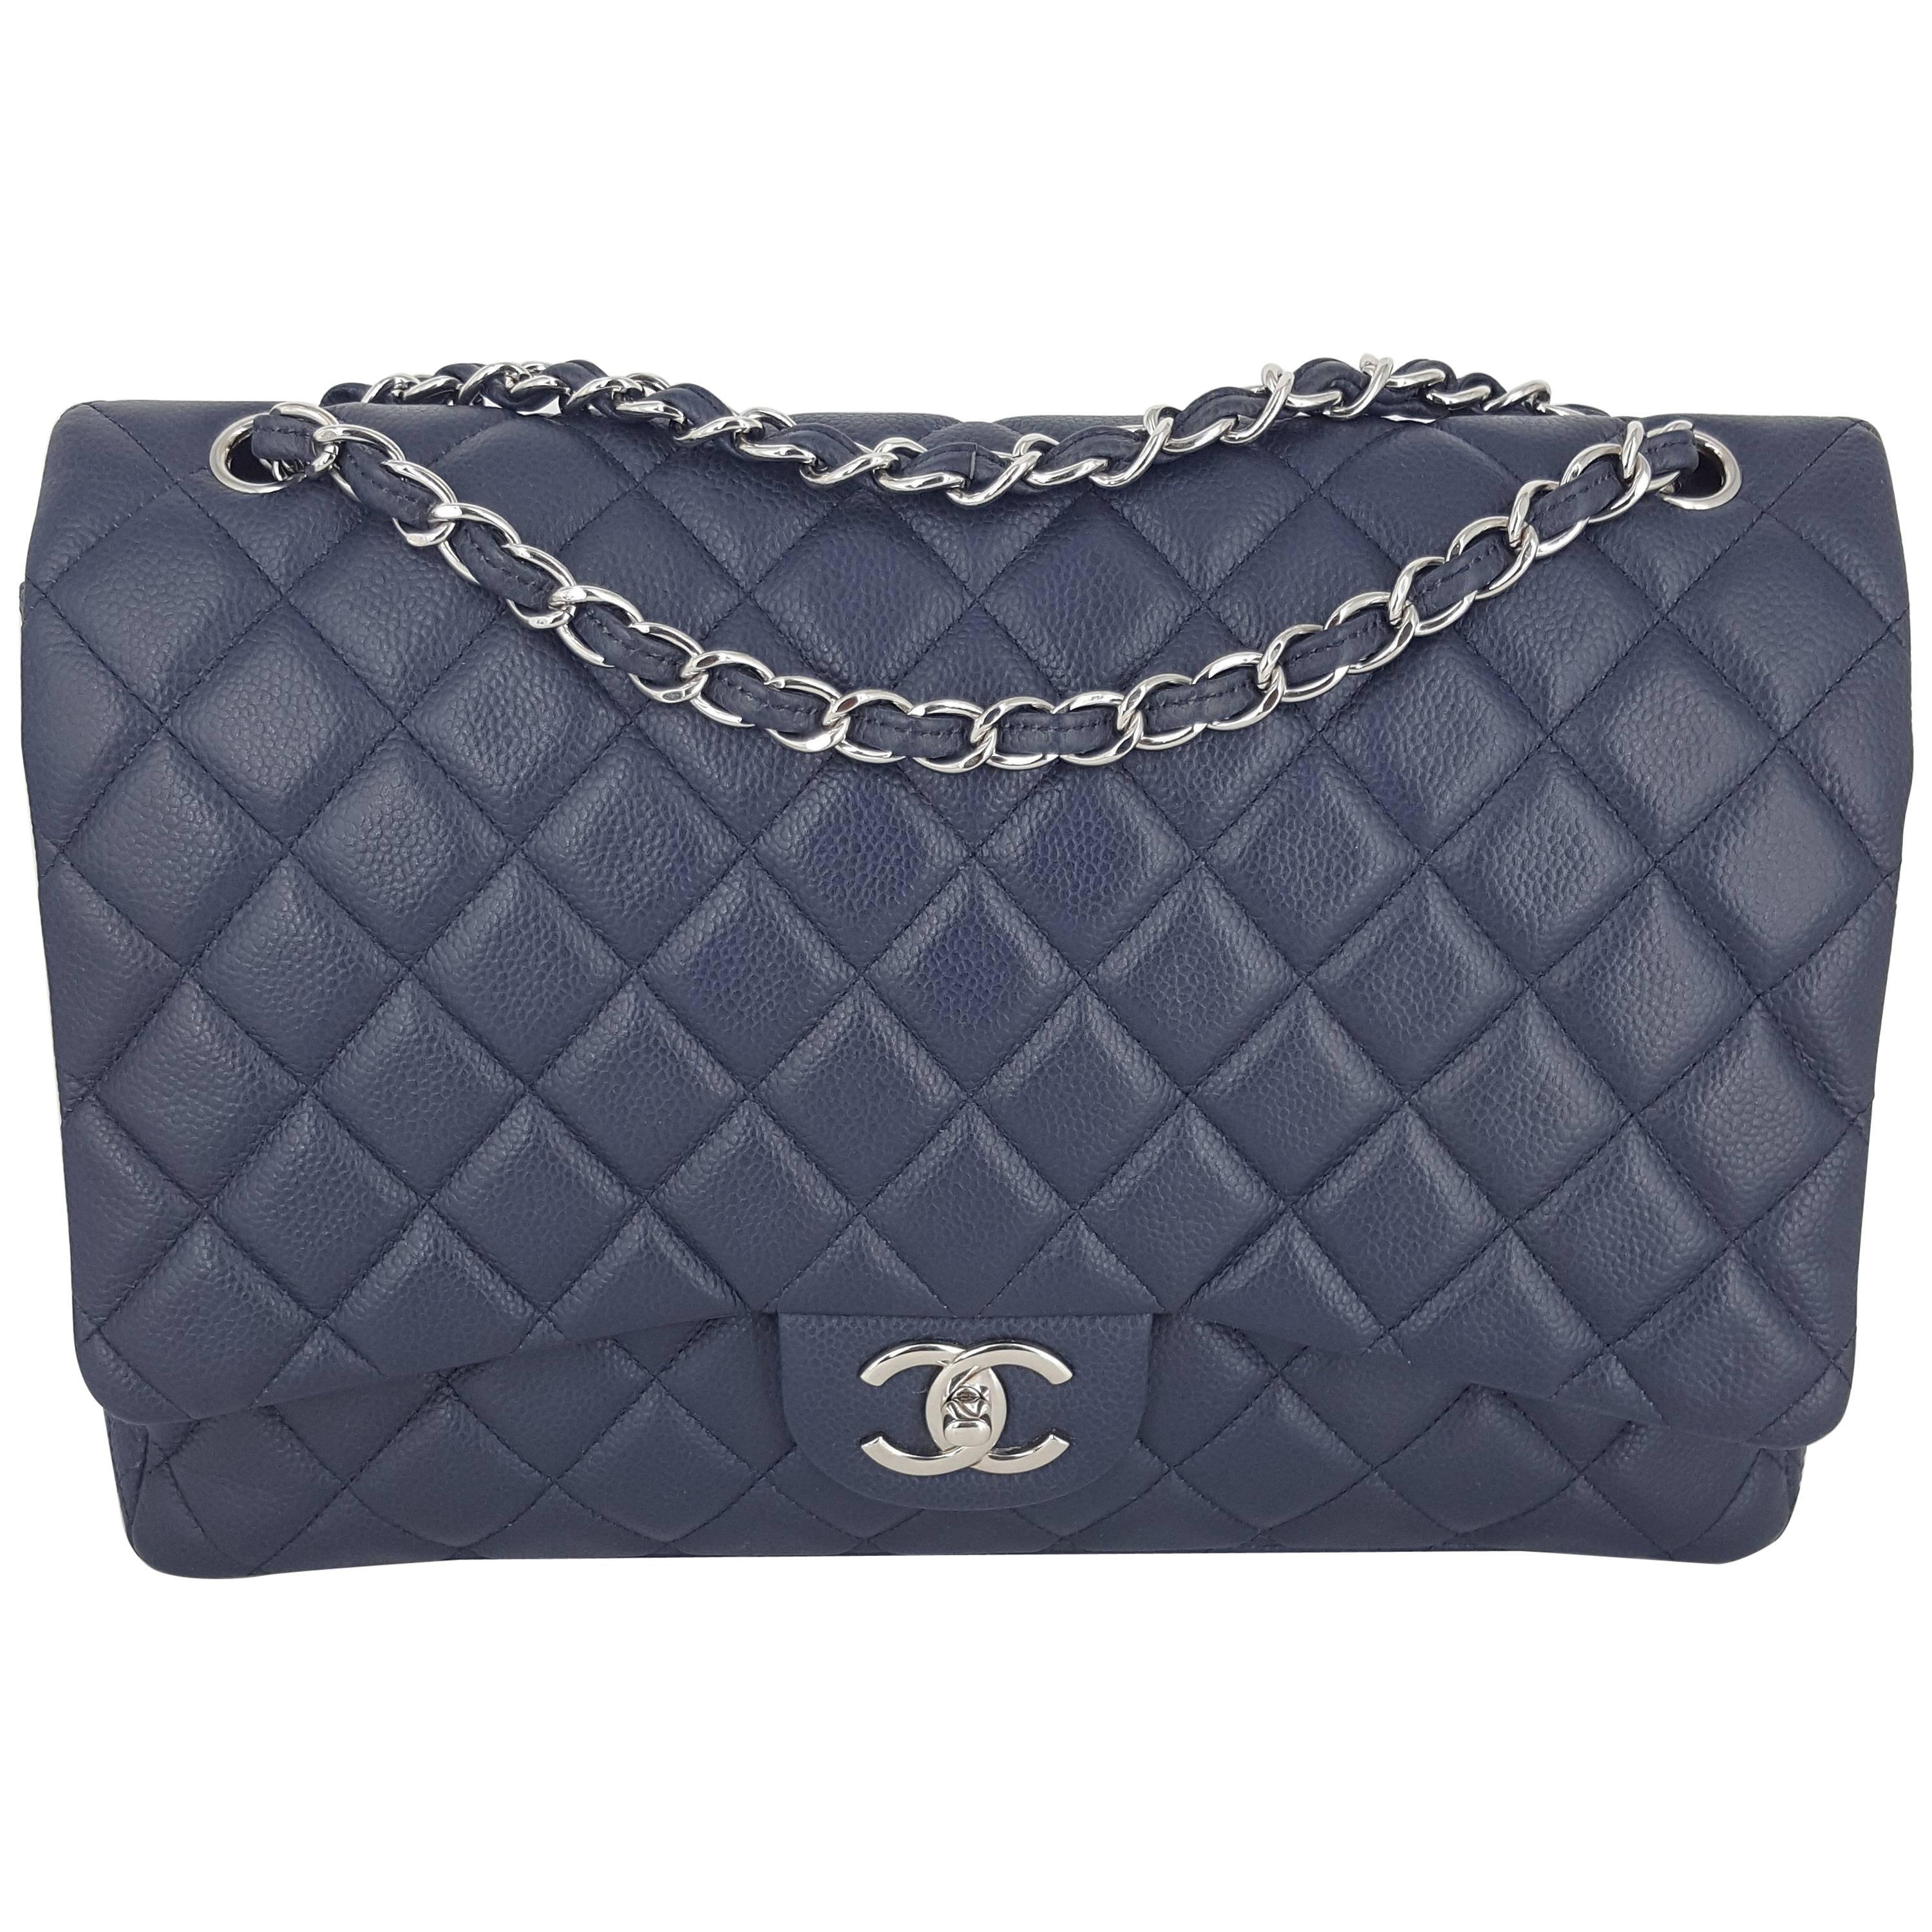 Chanel Navy Blue Caviar Maxi Double Flap With Silver Hardware